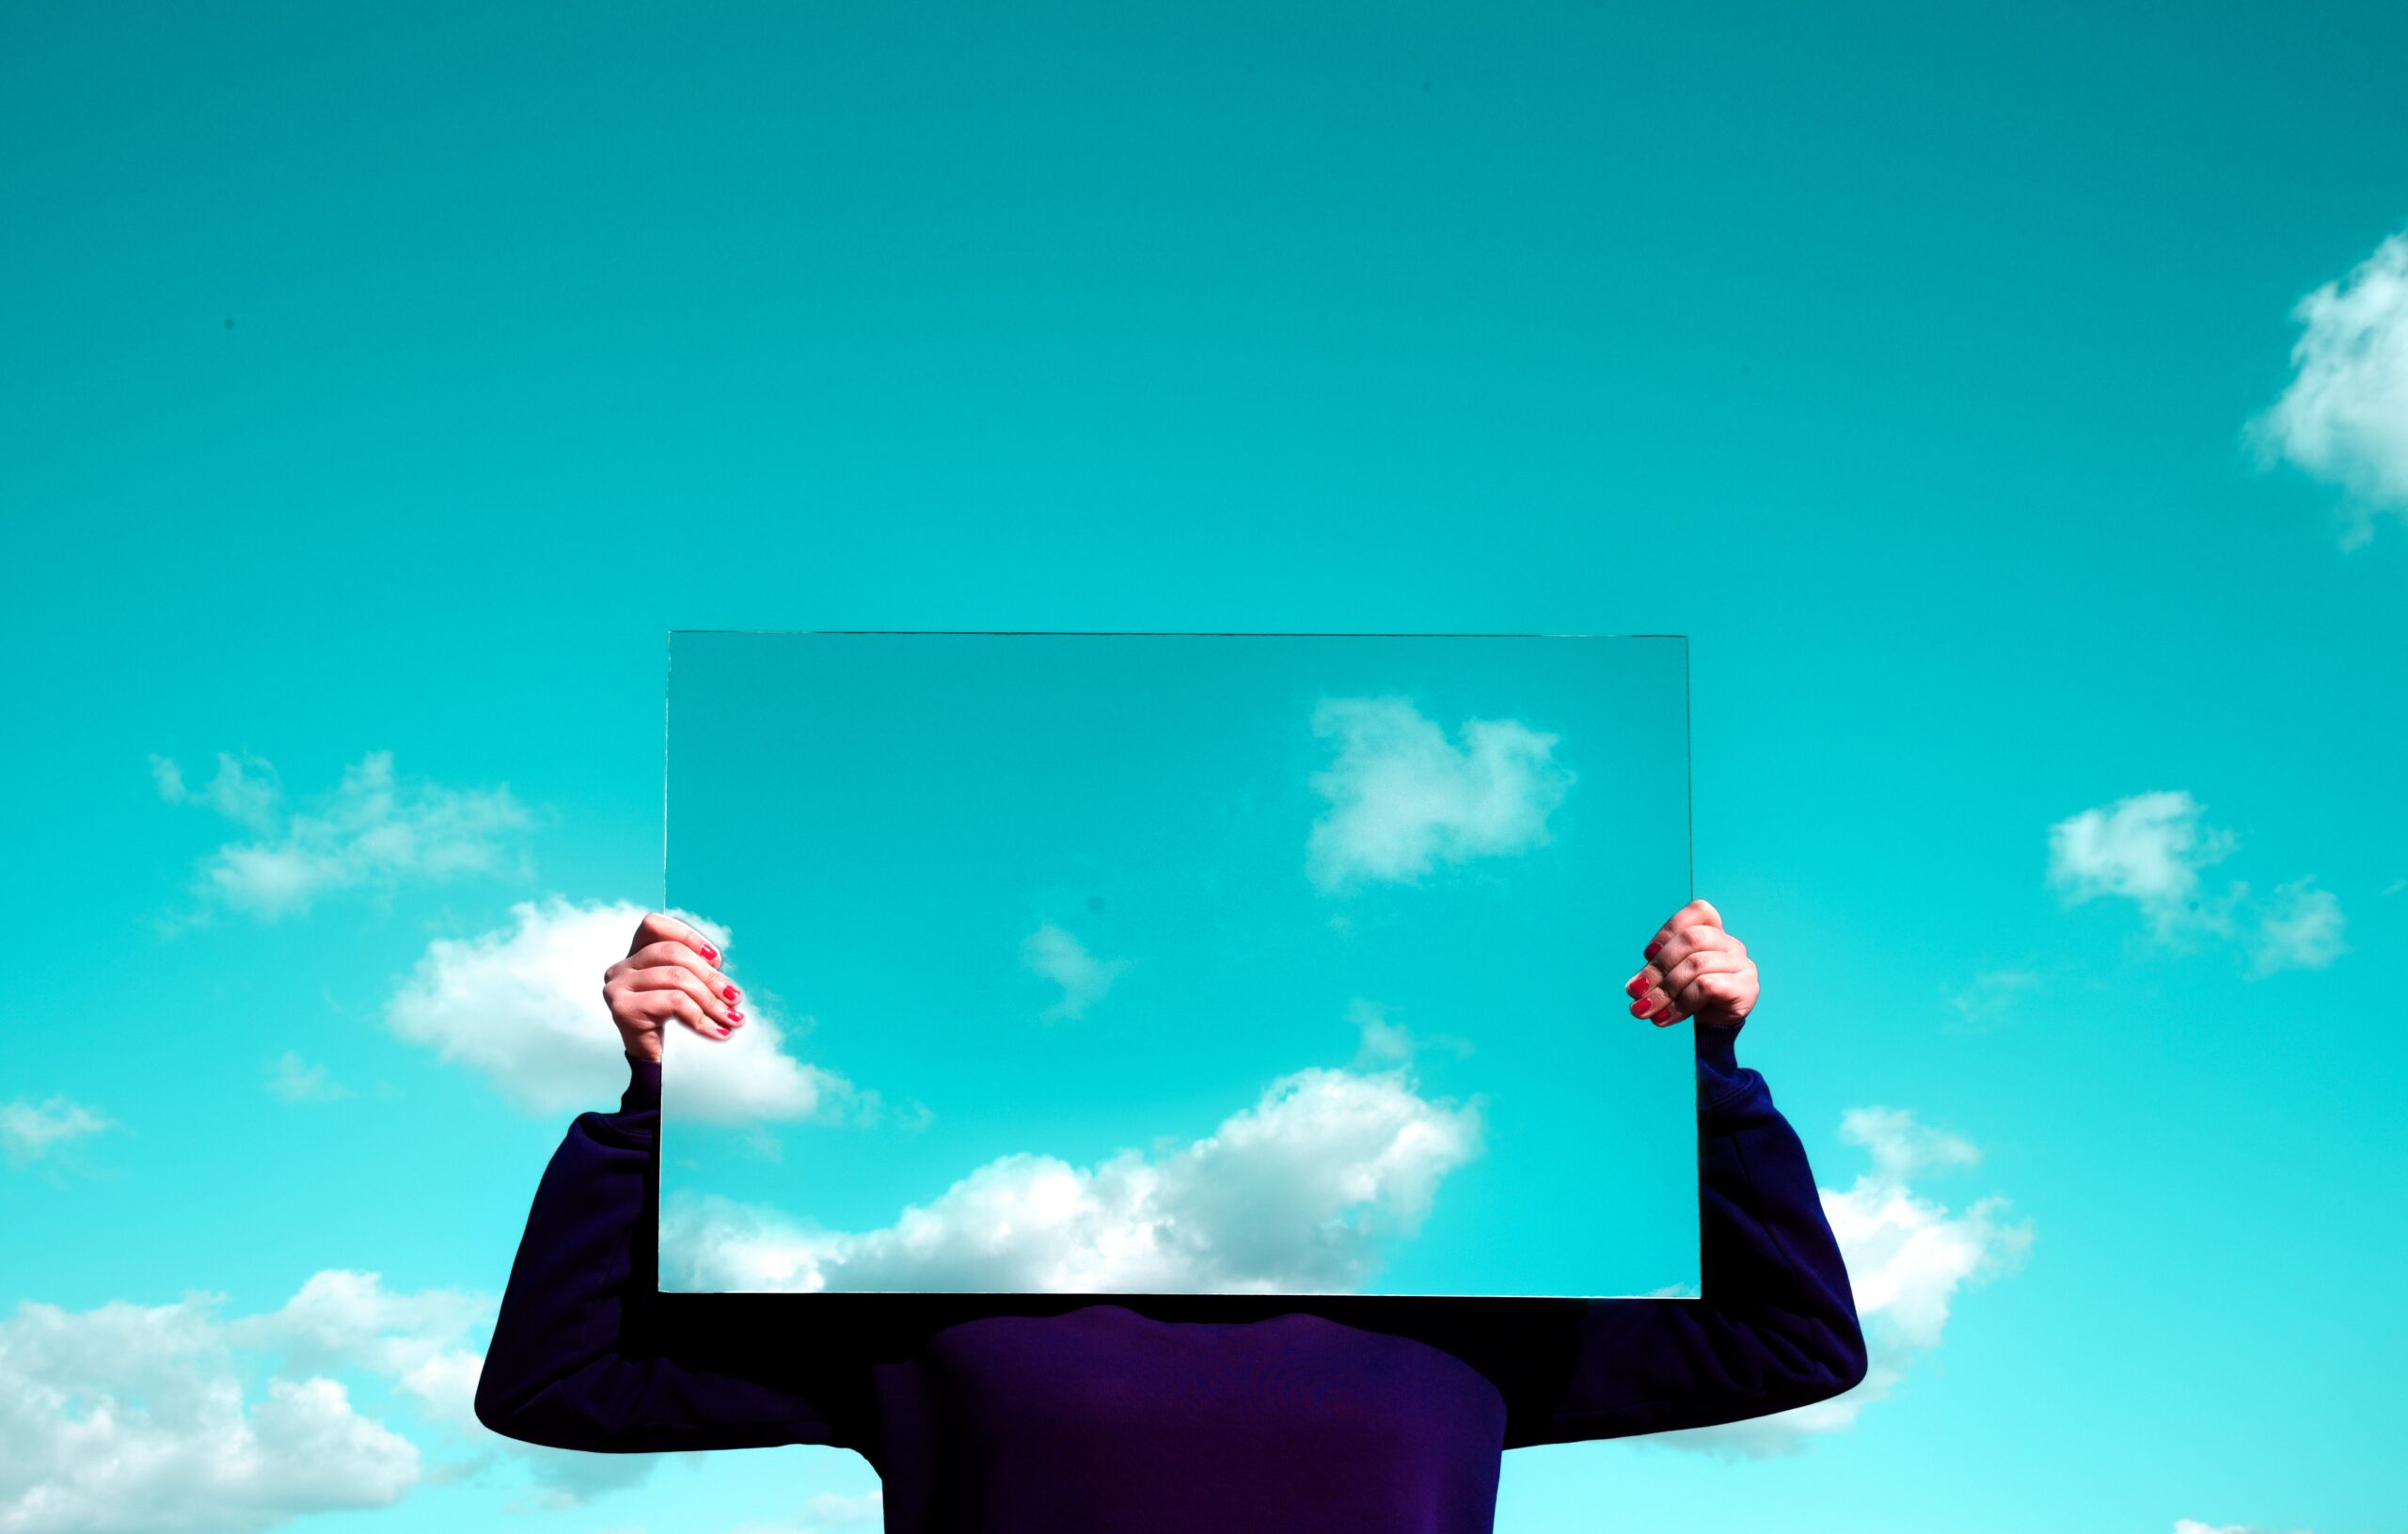 A person holding a mirror that has a reflection of the sky